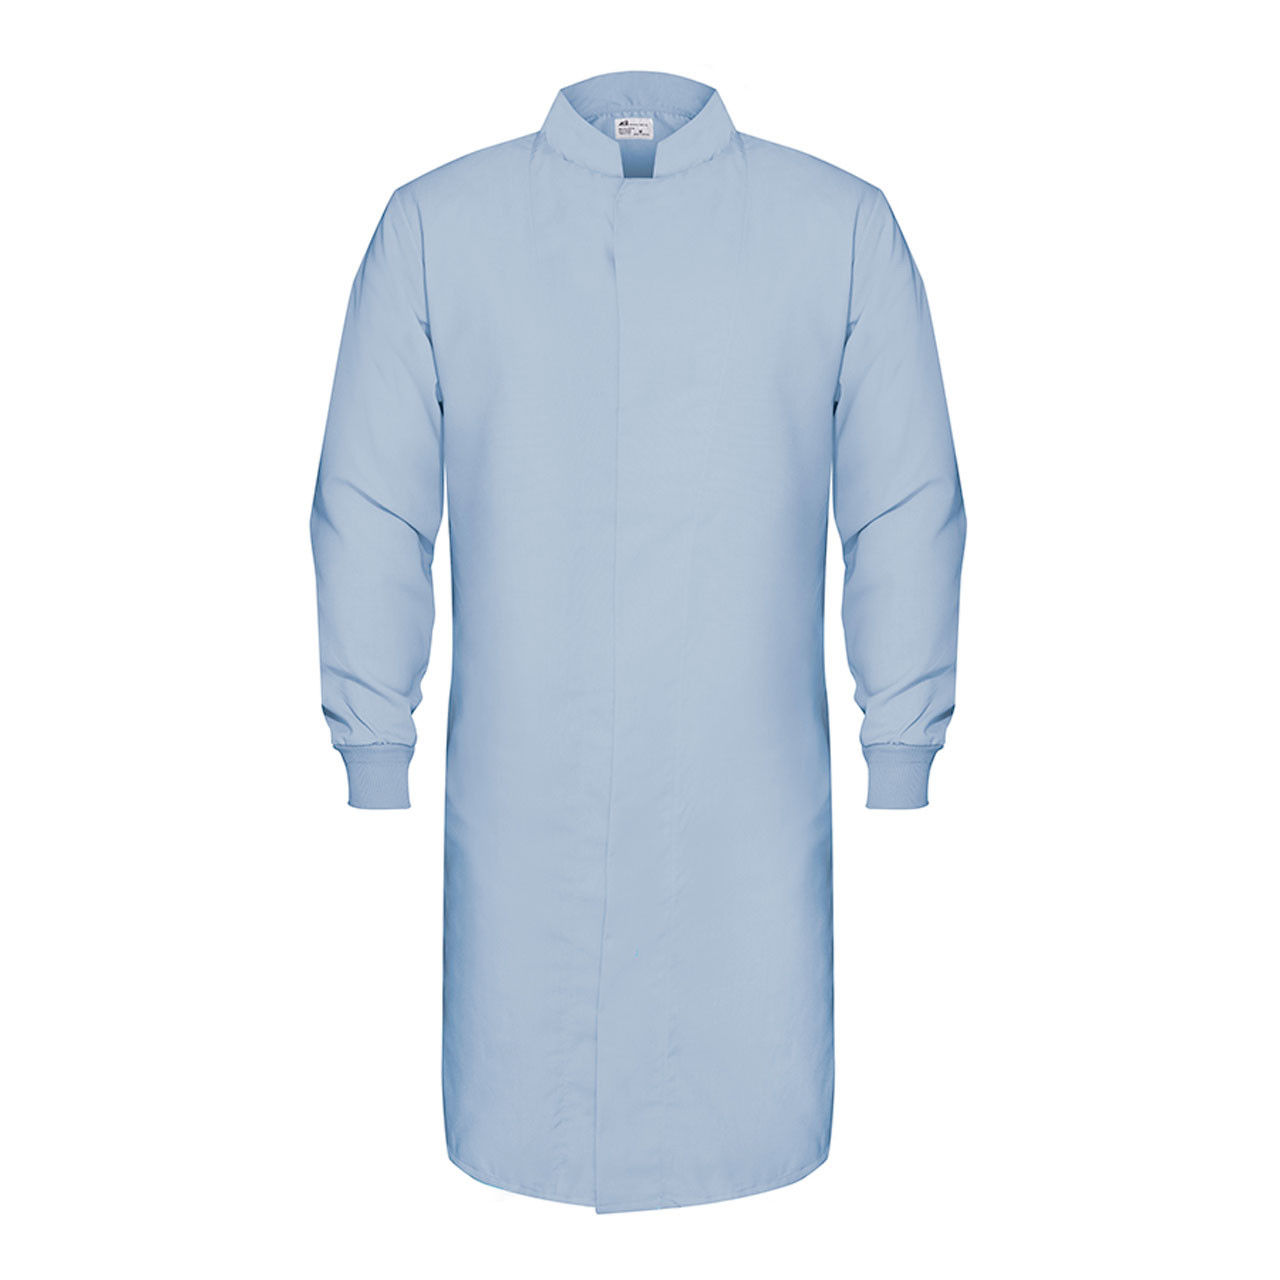 What closure mechanism does this lab coat feature?